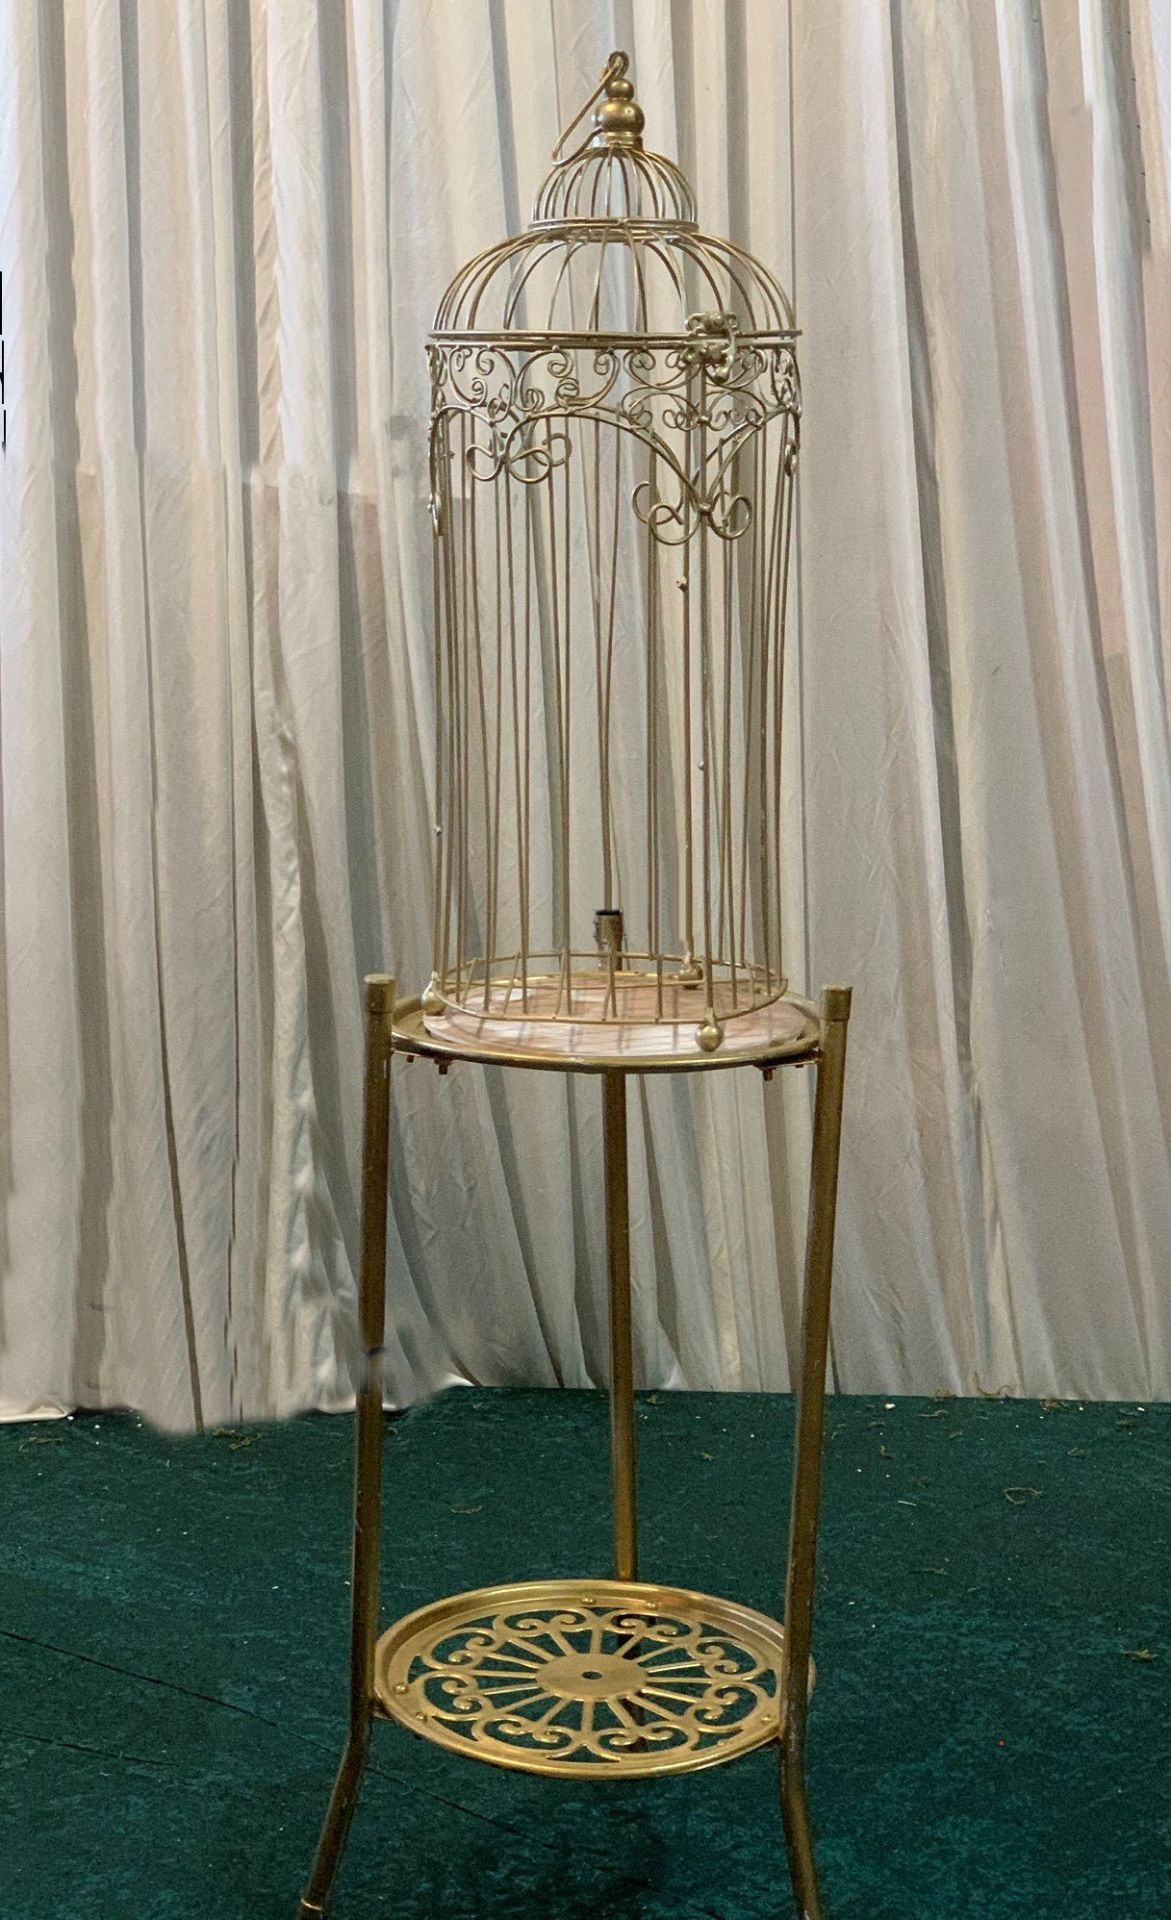 2 x Ornate Display Birdcage on Stand - Dimensions: 50x25cm, 51x23cm - Ref: Lot 86 - CL548 -